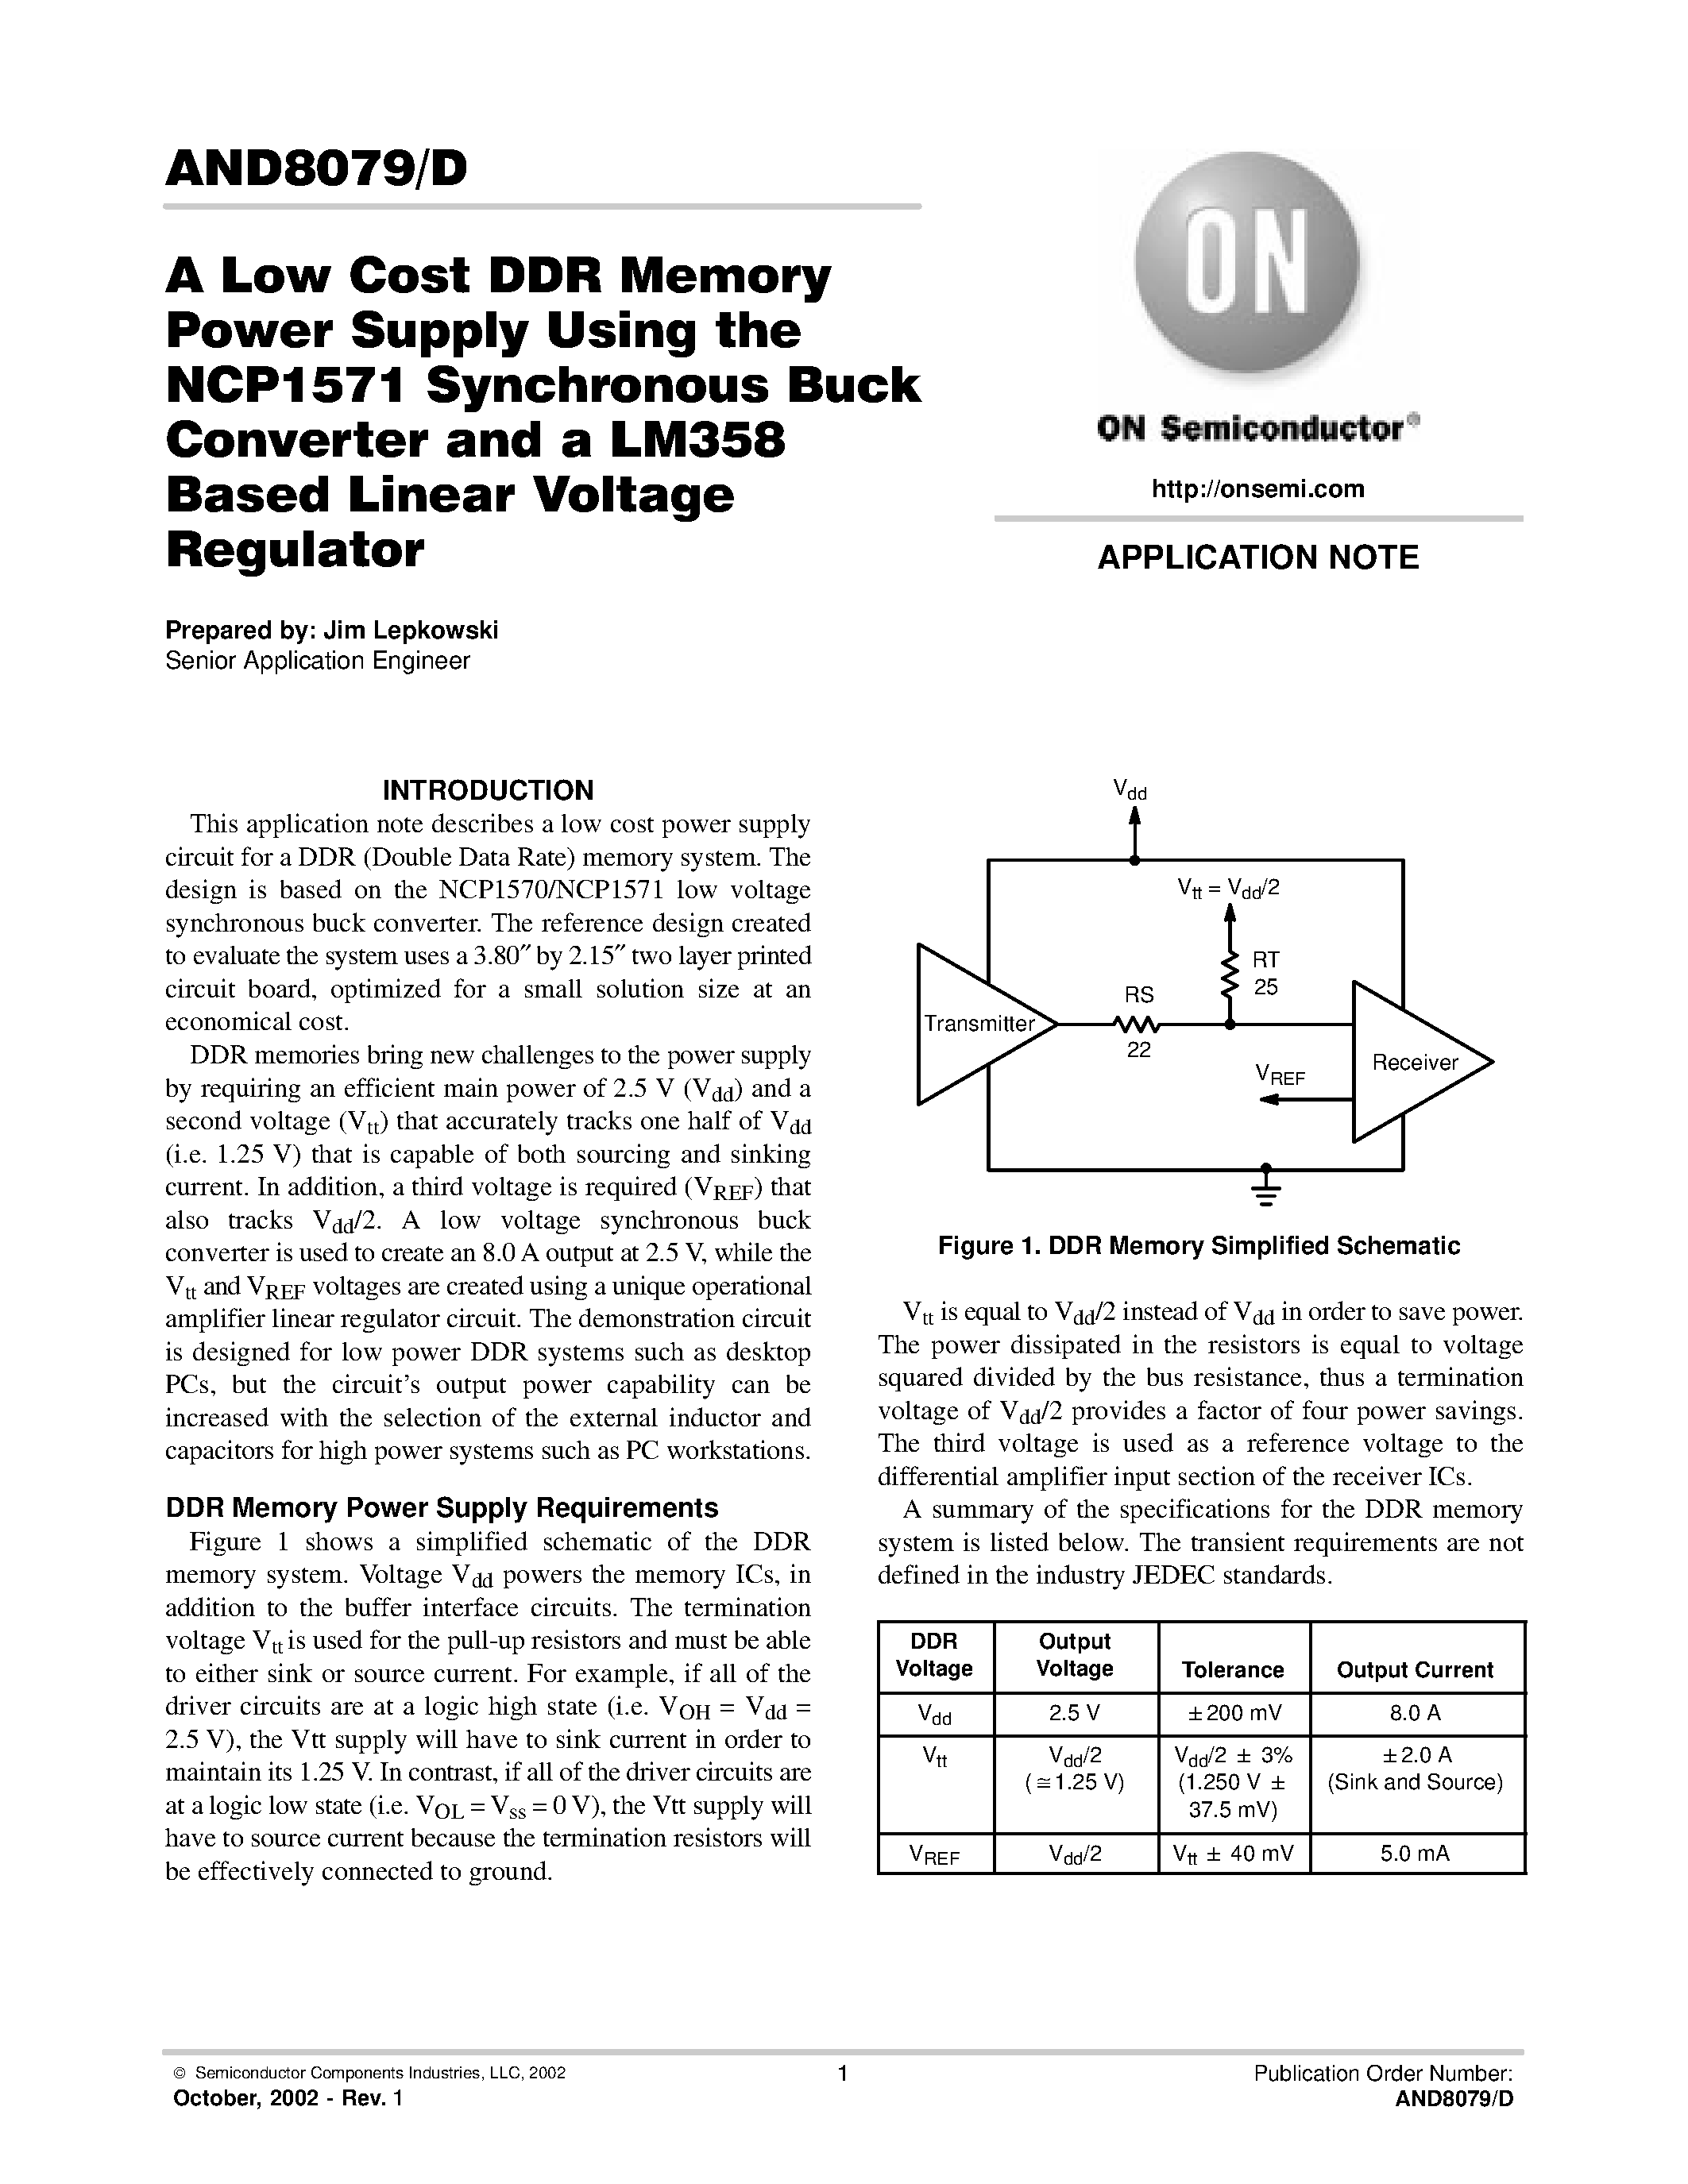 Даташит AND8079D - A Low Cost DDR Memory Power Supply Using the NCP1571 Synchronous Buck Converter and a LM358 Based Linear Voltage Regulator страница 1